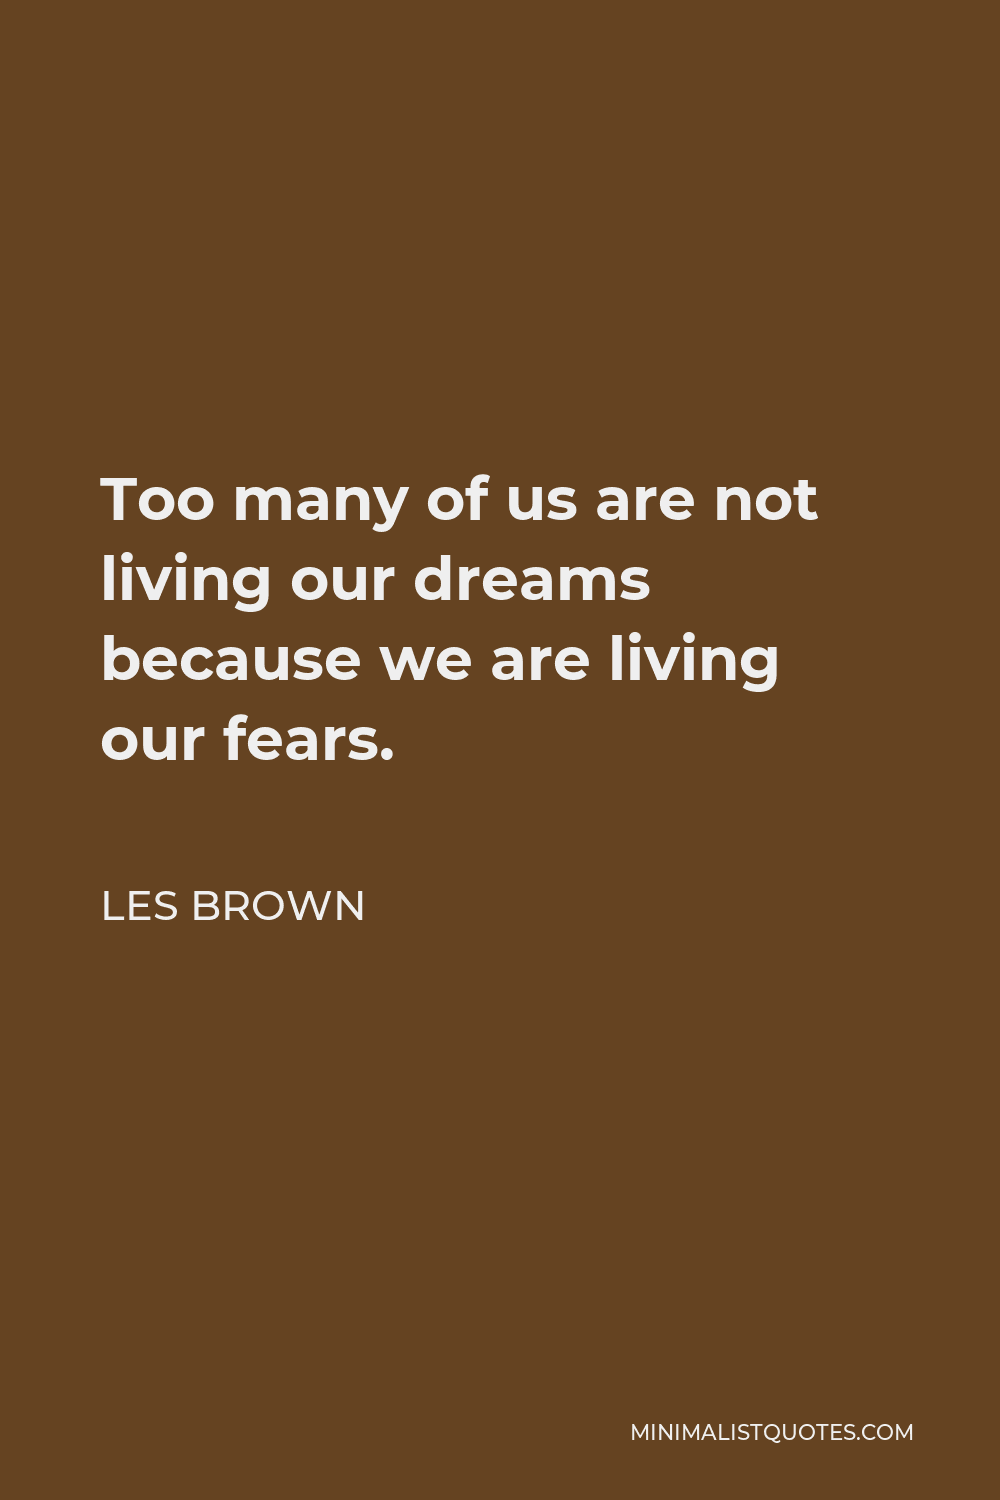 Les Brown Quote - Too many of us are not living our dreams because we are living our fears.